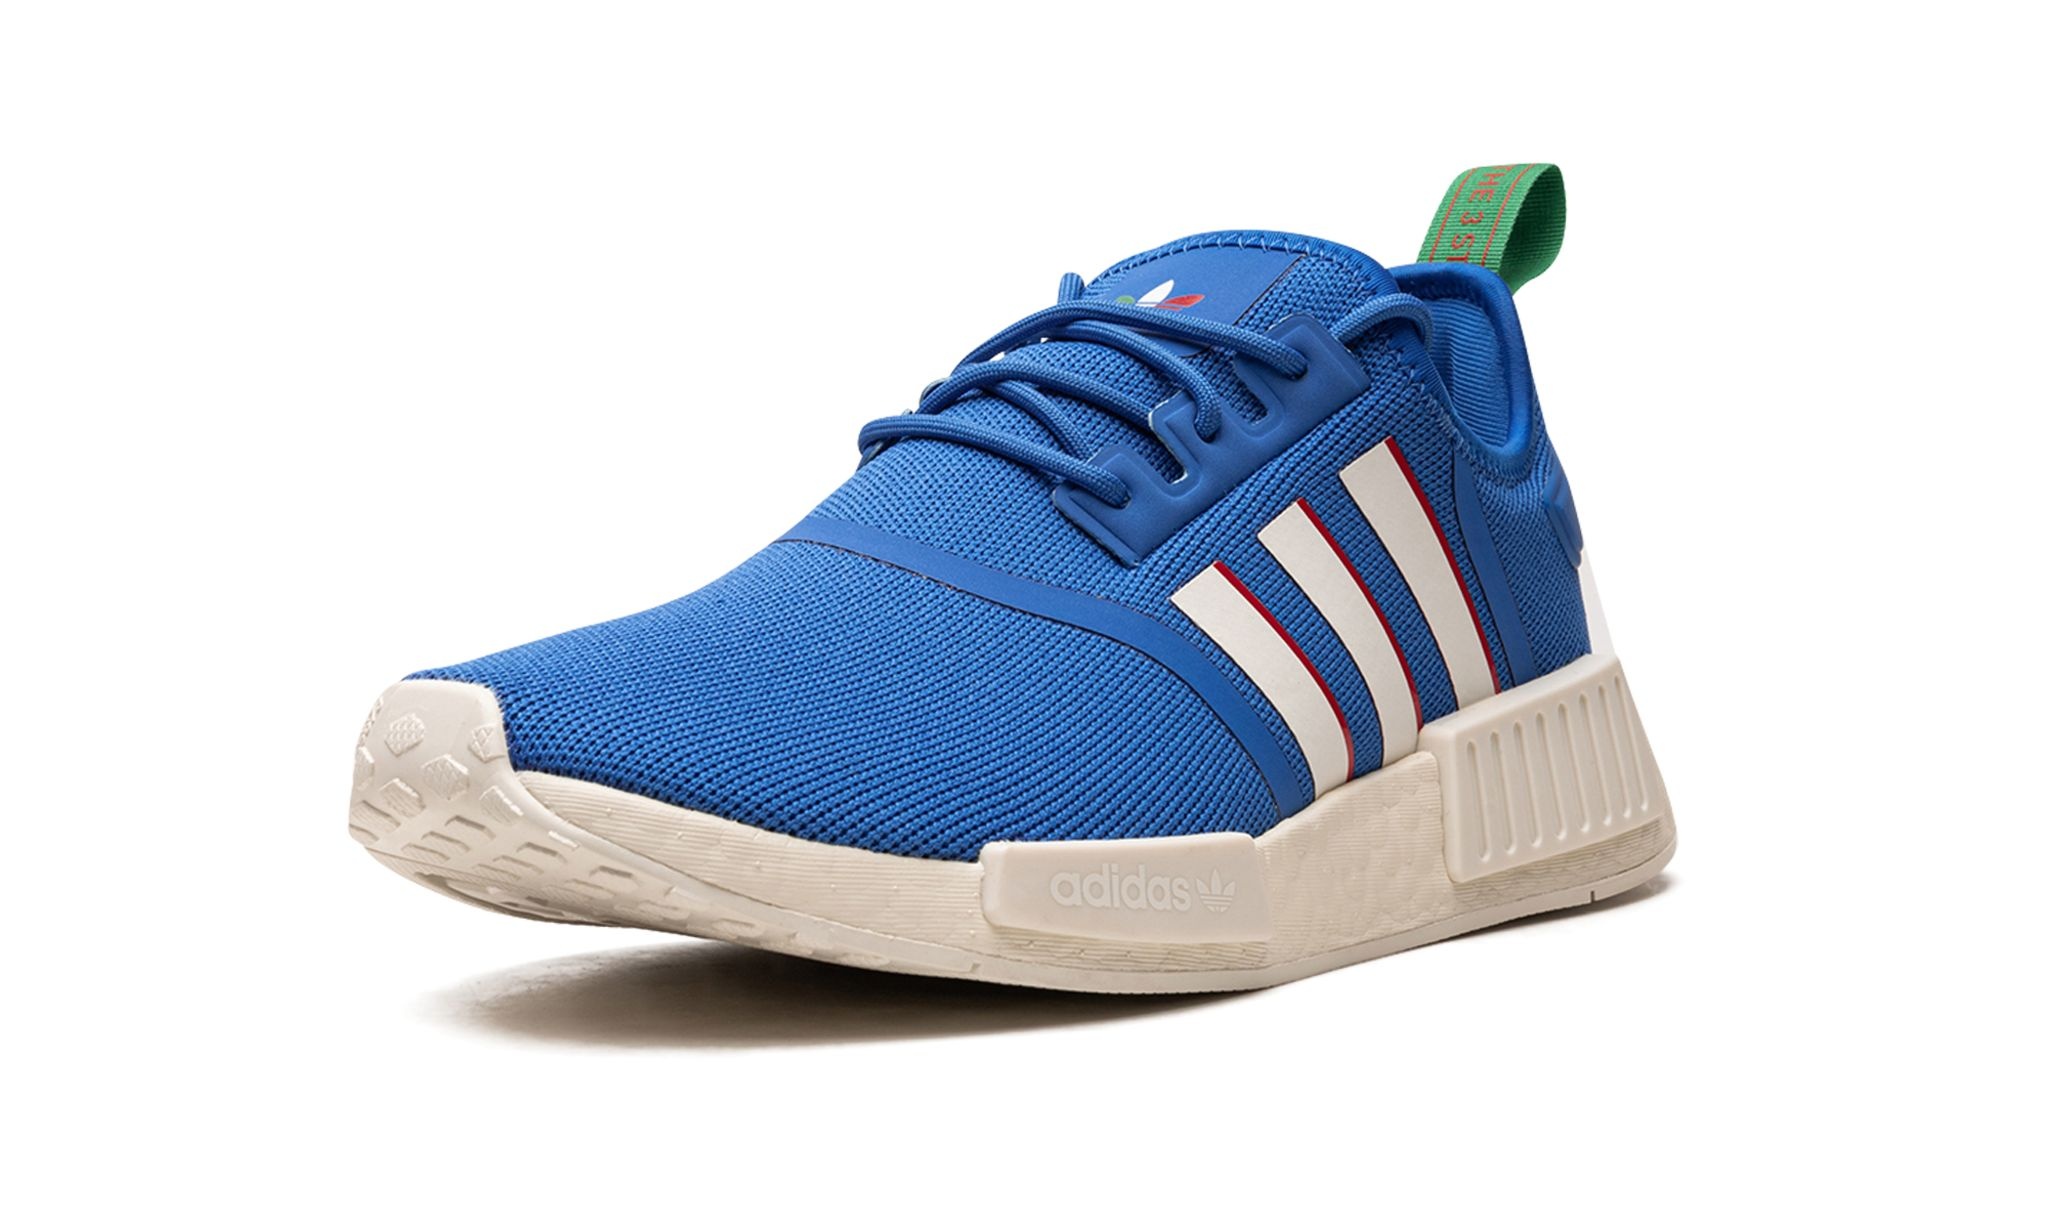 Nmd r1 "Red / Royal Blue / Off White" - 2